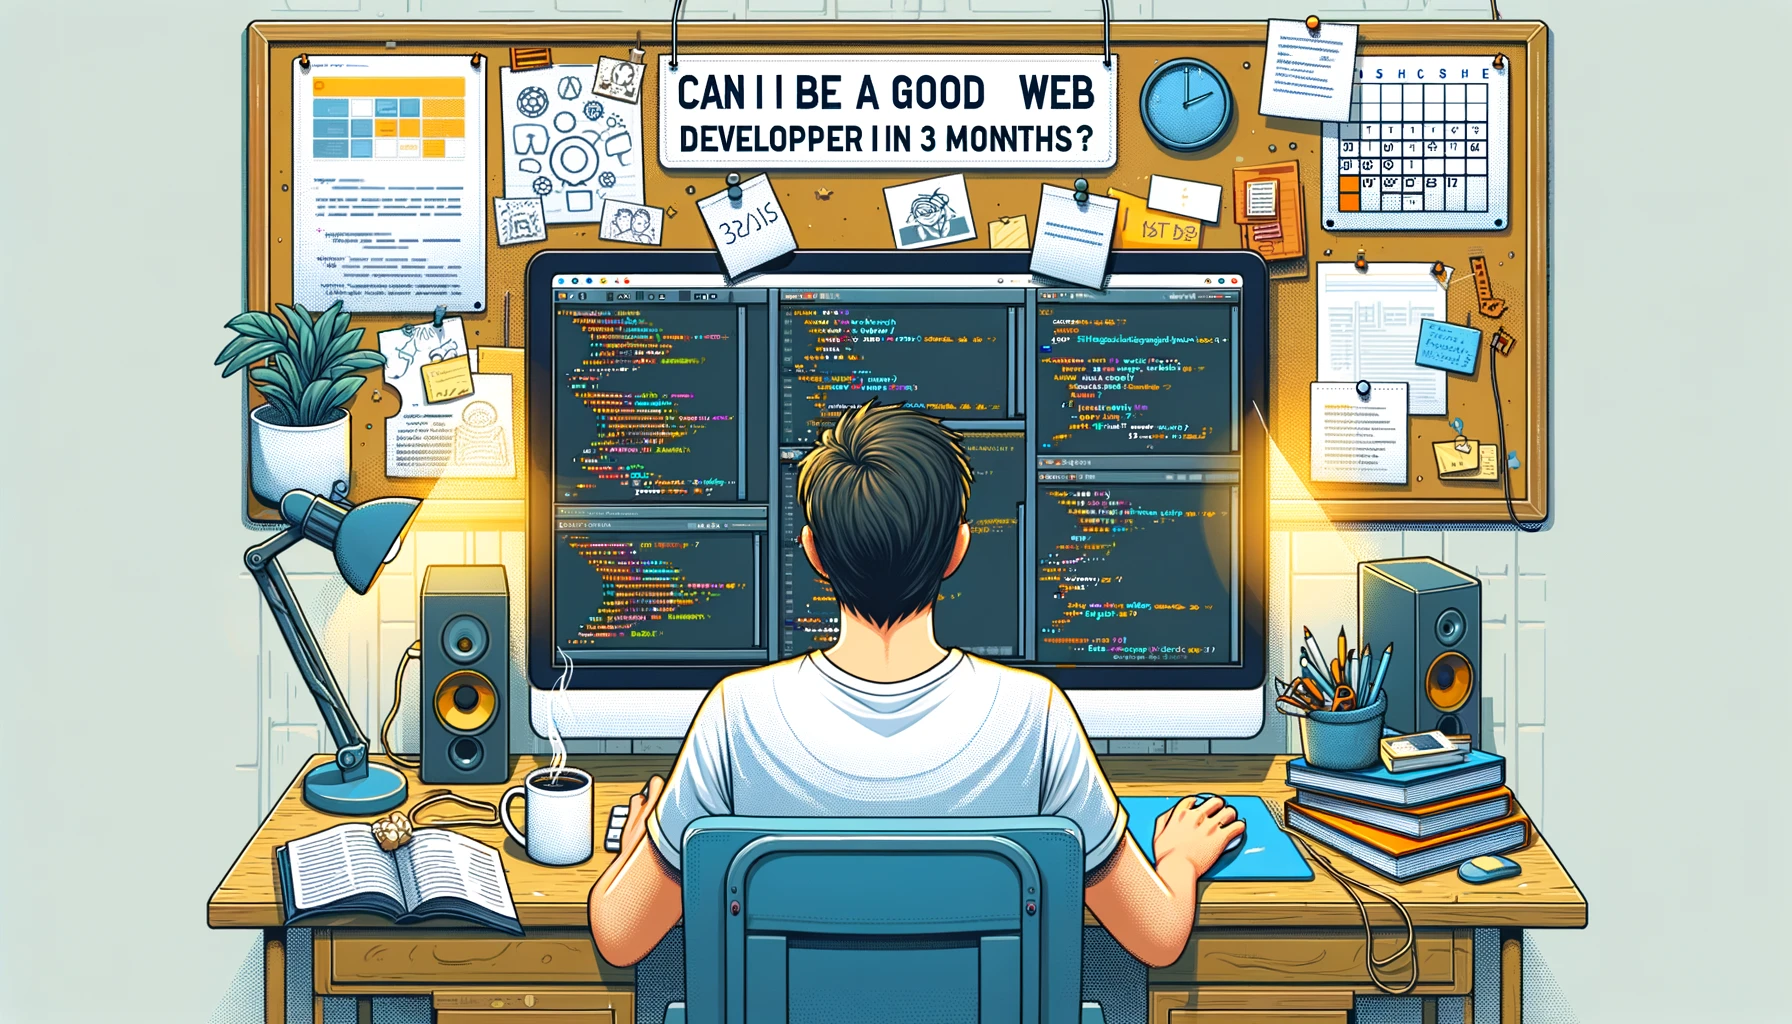 Can I Be a Good Web Developer in 3 Months?